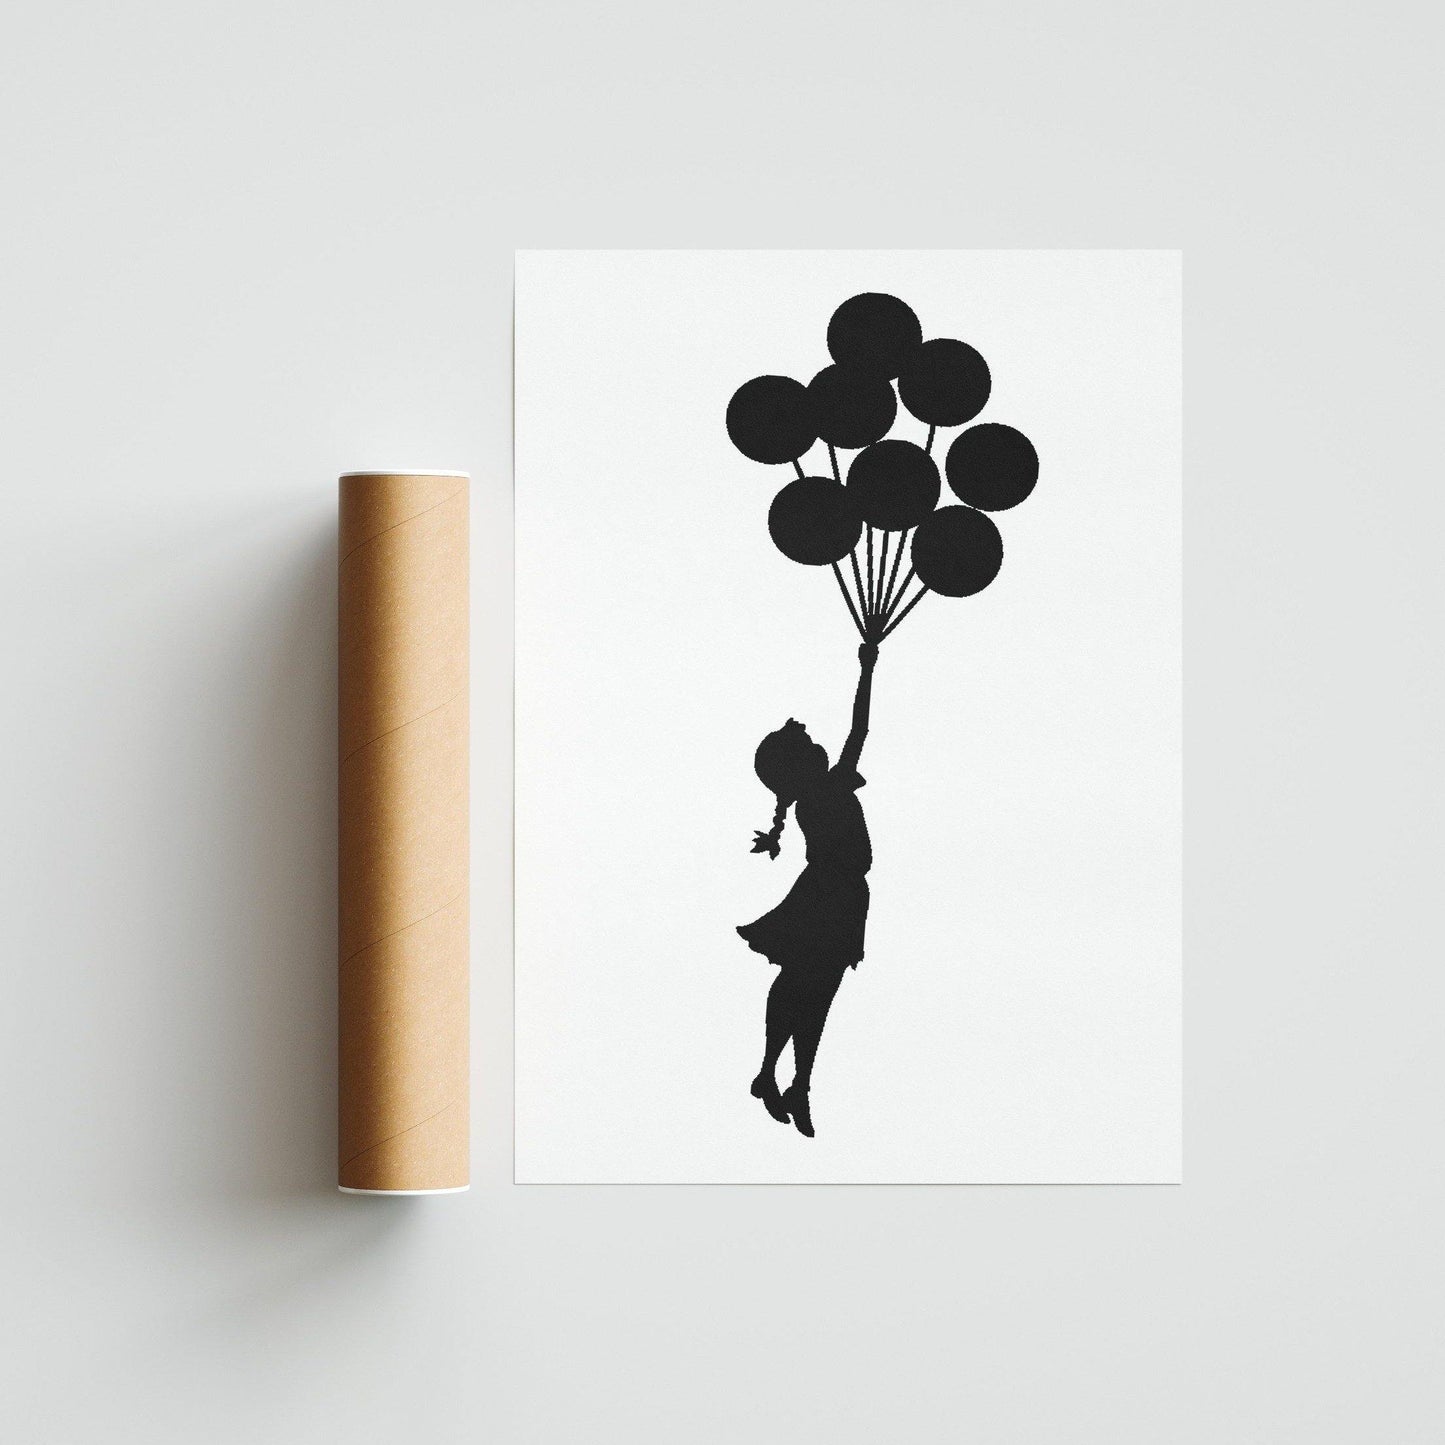 This Banksy Flying Girl with Balloons print is the perfect addition to your street art collection. Featuring a flying girl with balloons, this print is sure to add some personality to your space. Printed on high-quality paper, this print is perfect for framing and displaying in your home or office.